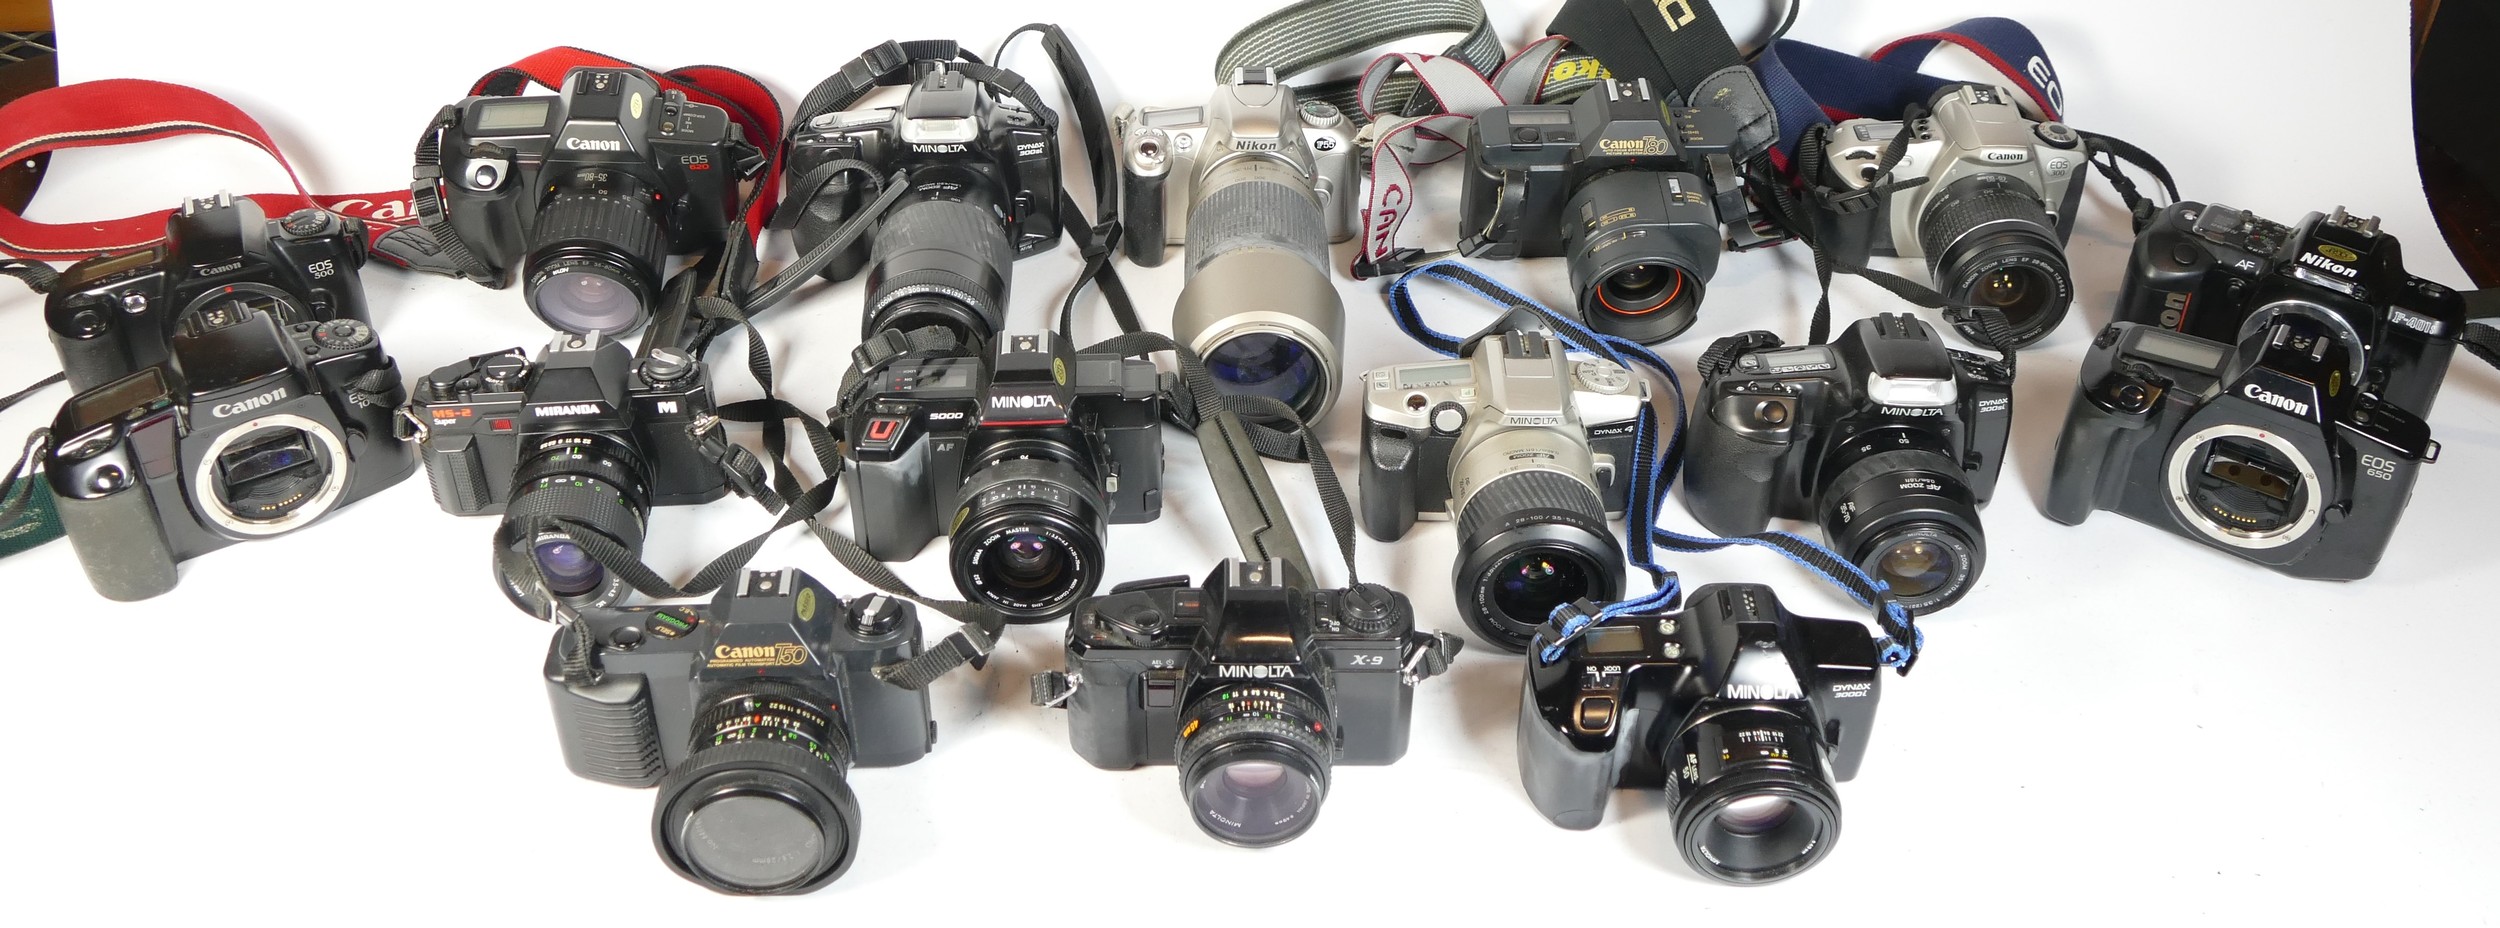 Twenty one SLR vintage film cameras to include a Minolta Dynax 4, a Nikon F55, a Canon T80, and a